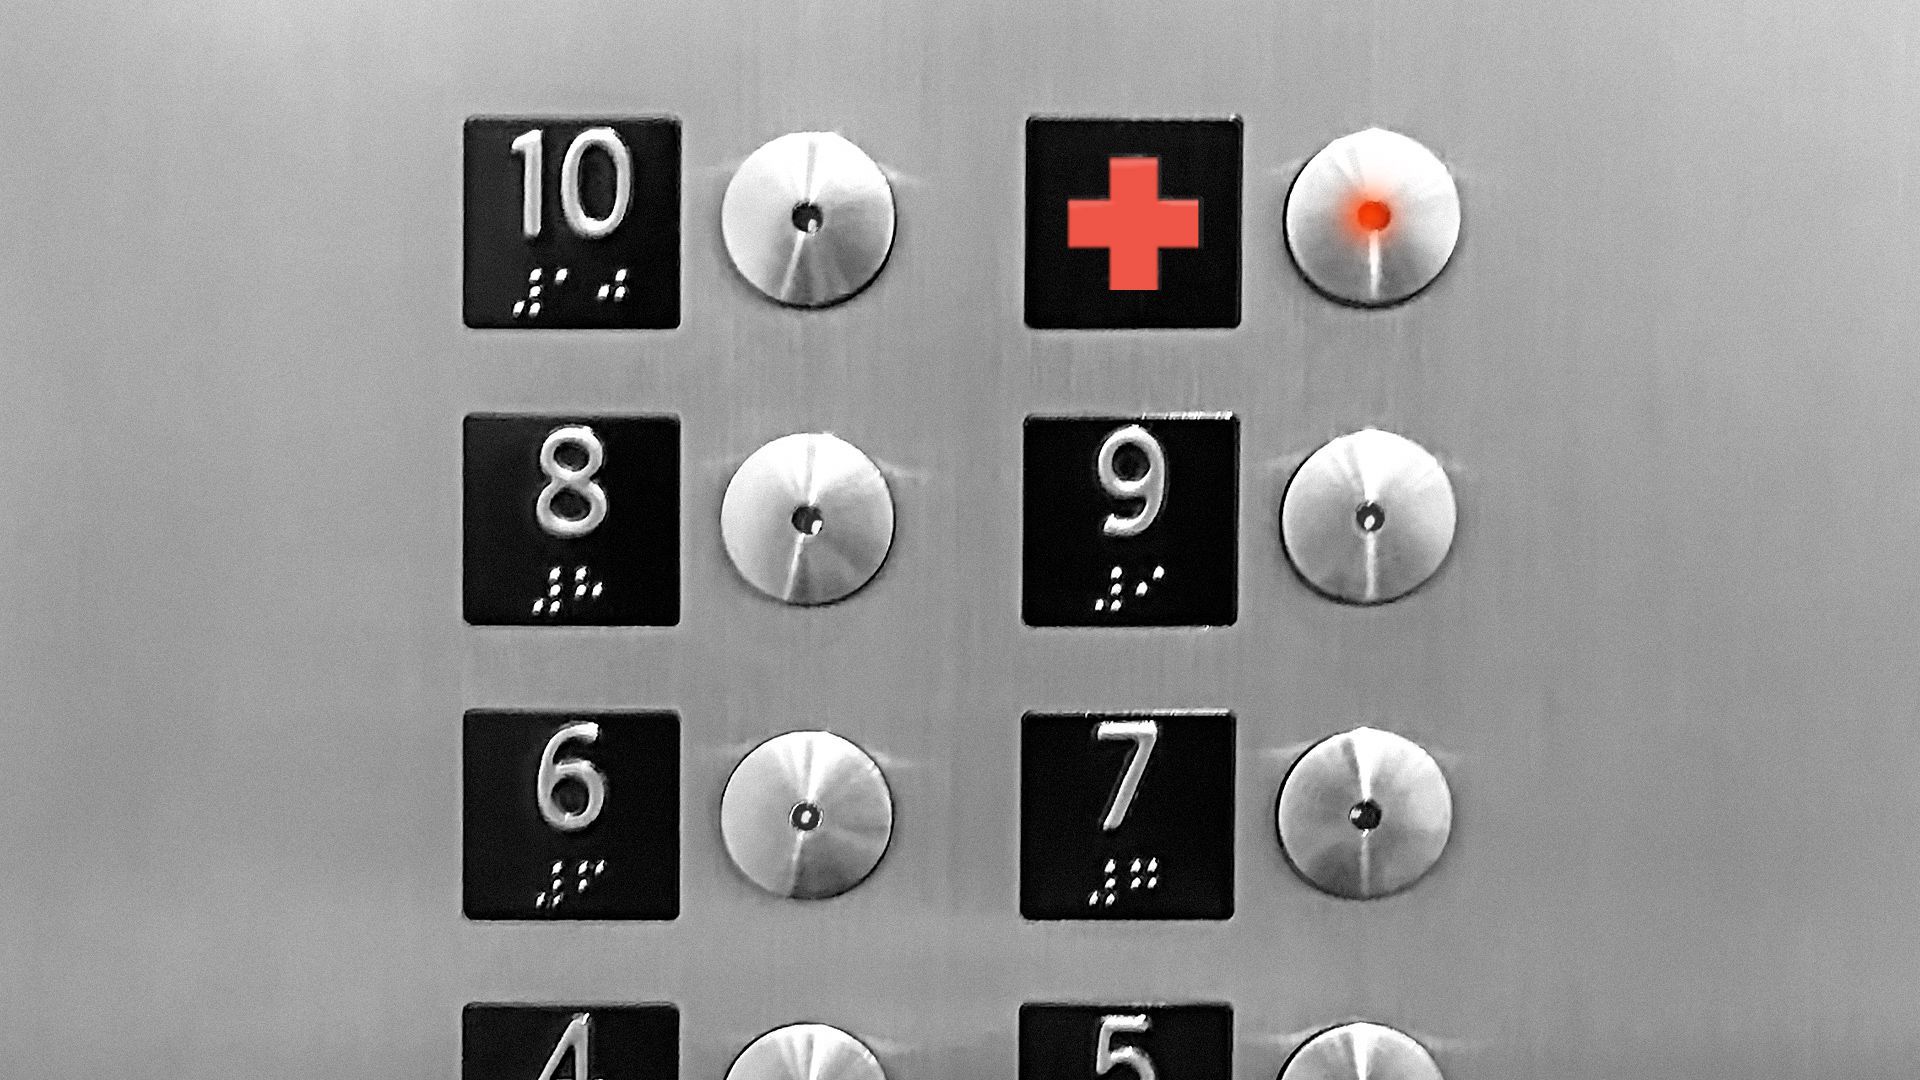 Illustration of elevator buttons, one of them with a lit up red cross instead of a number.